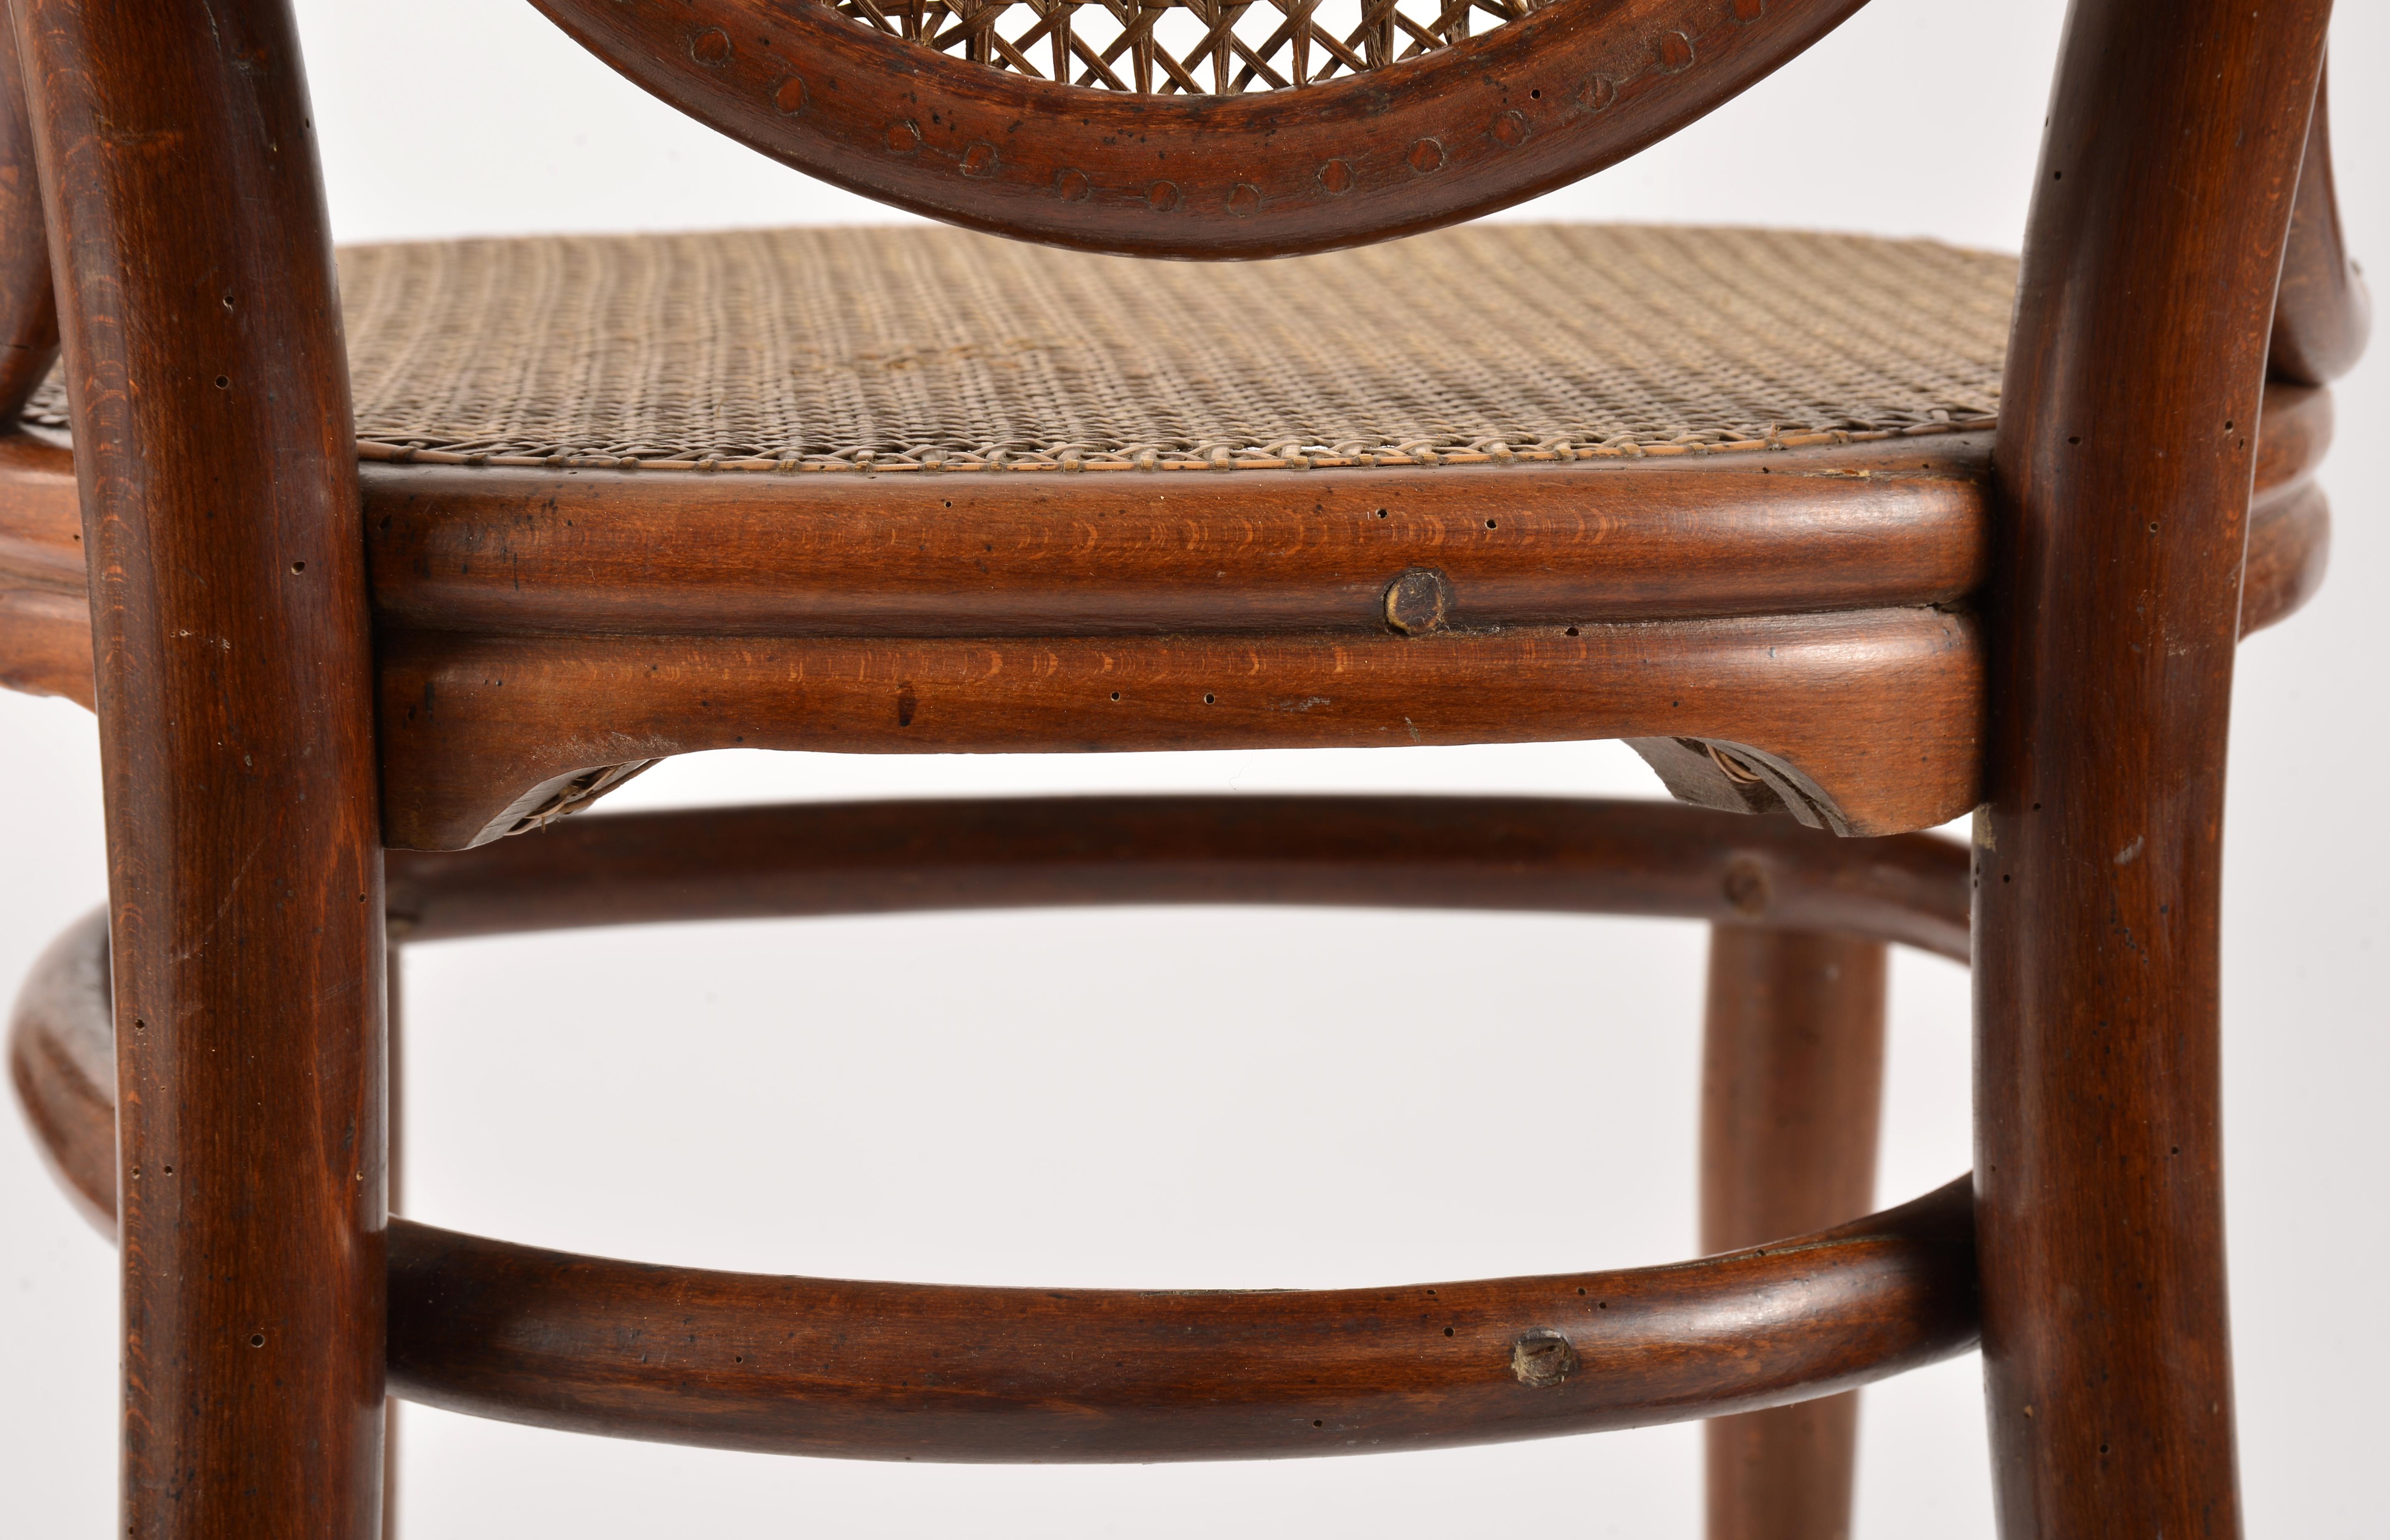 4 bentwood chairs, number 7, published by Thonet at the end of the 19th century. 7